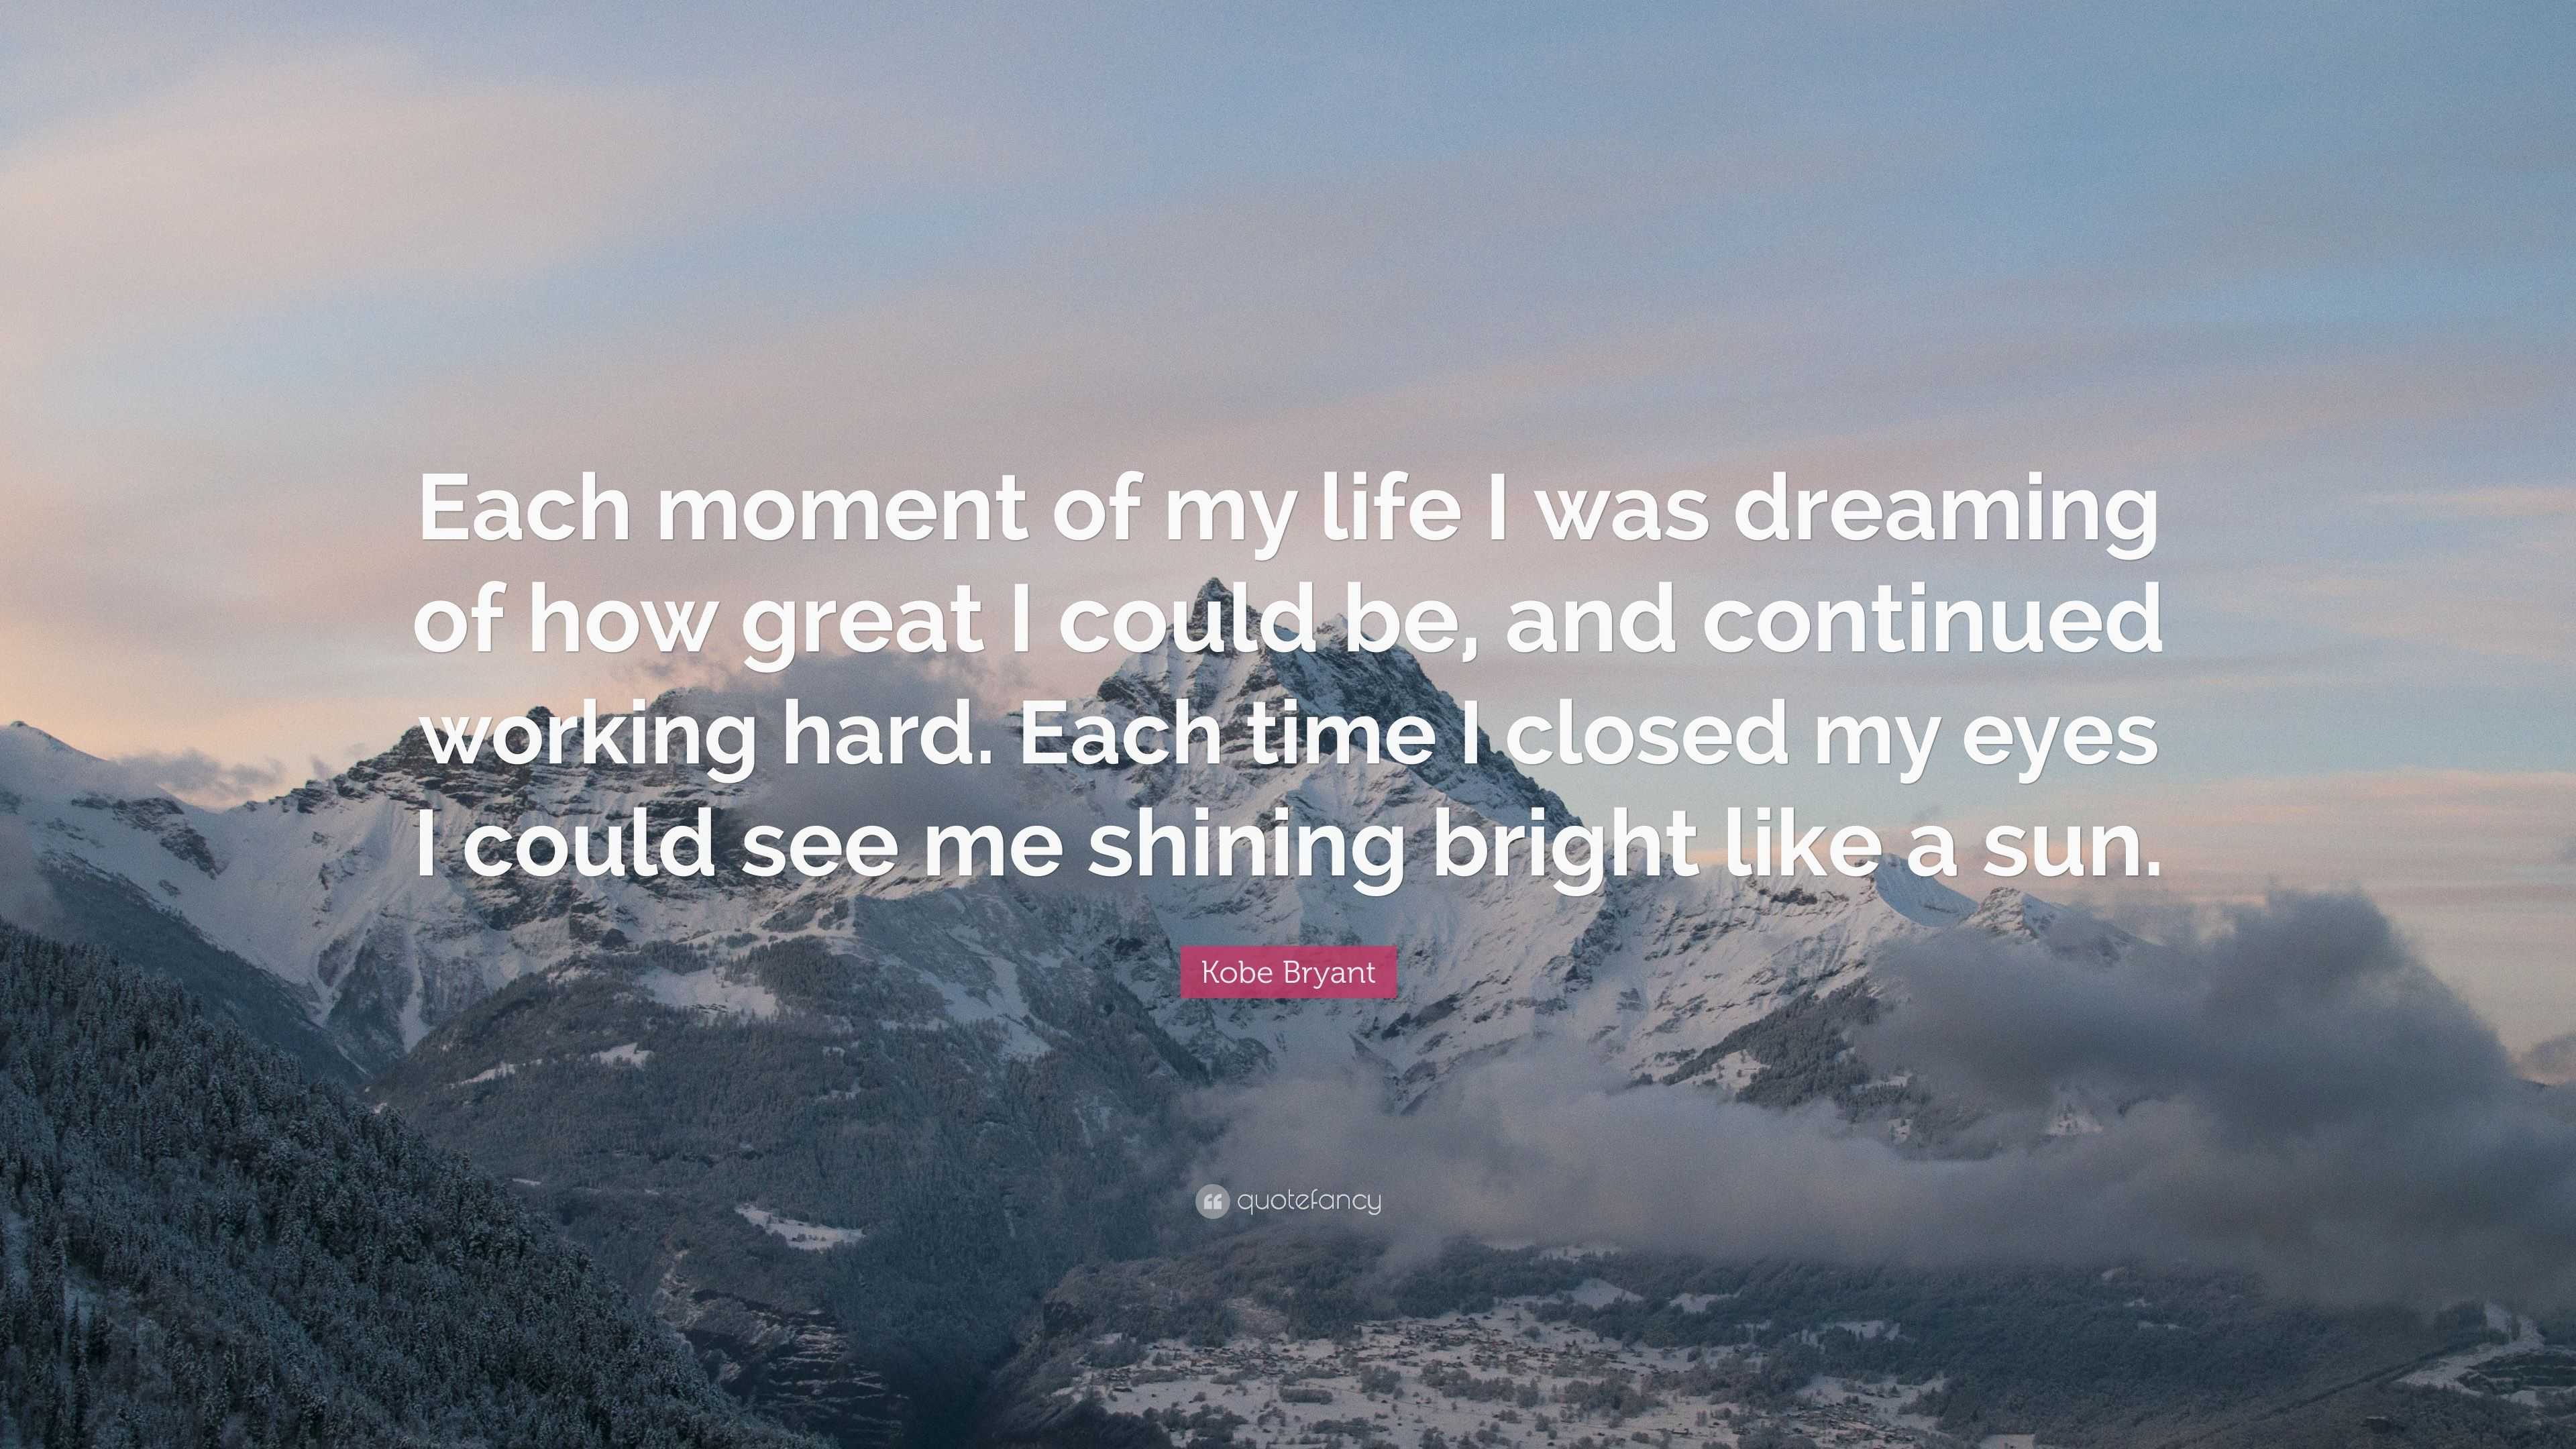 Kobe Bryant Quote: “Each moment of my life I was dreaming of how great ...